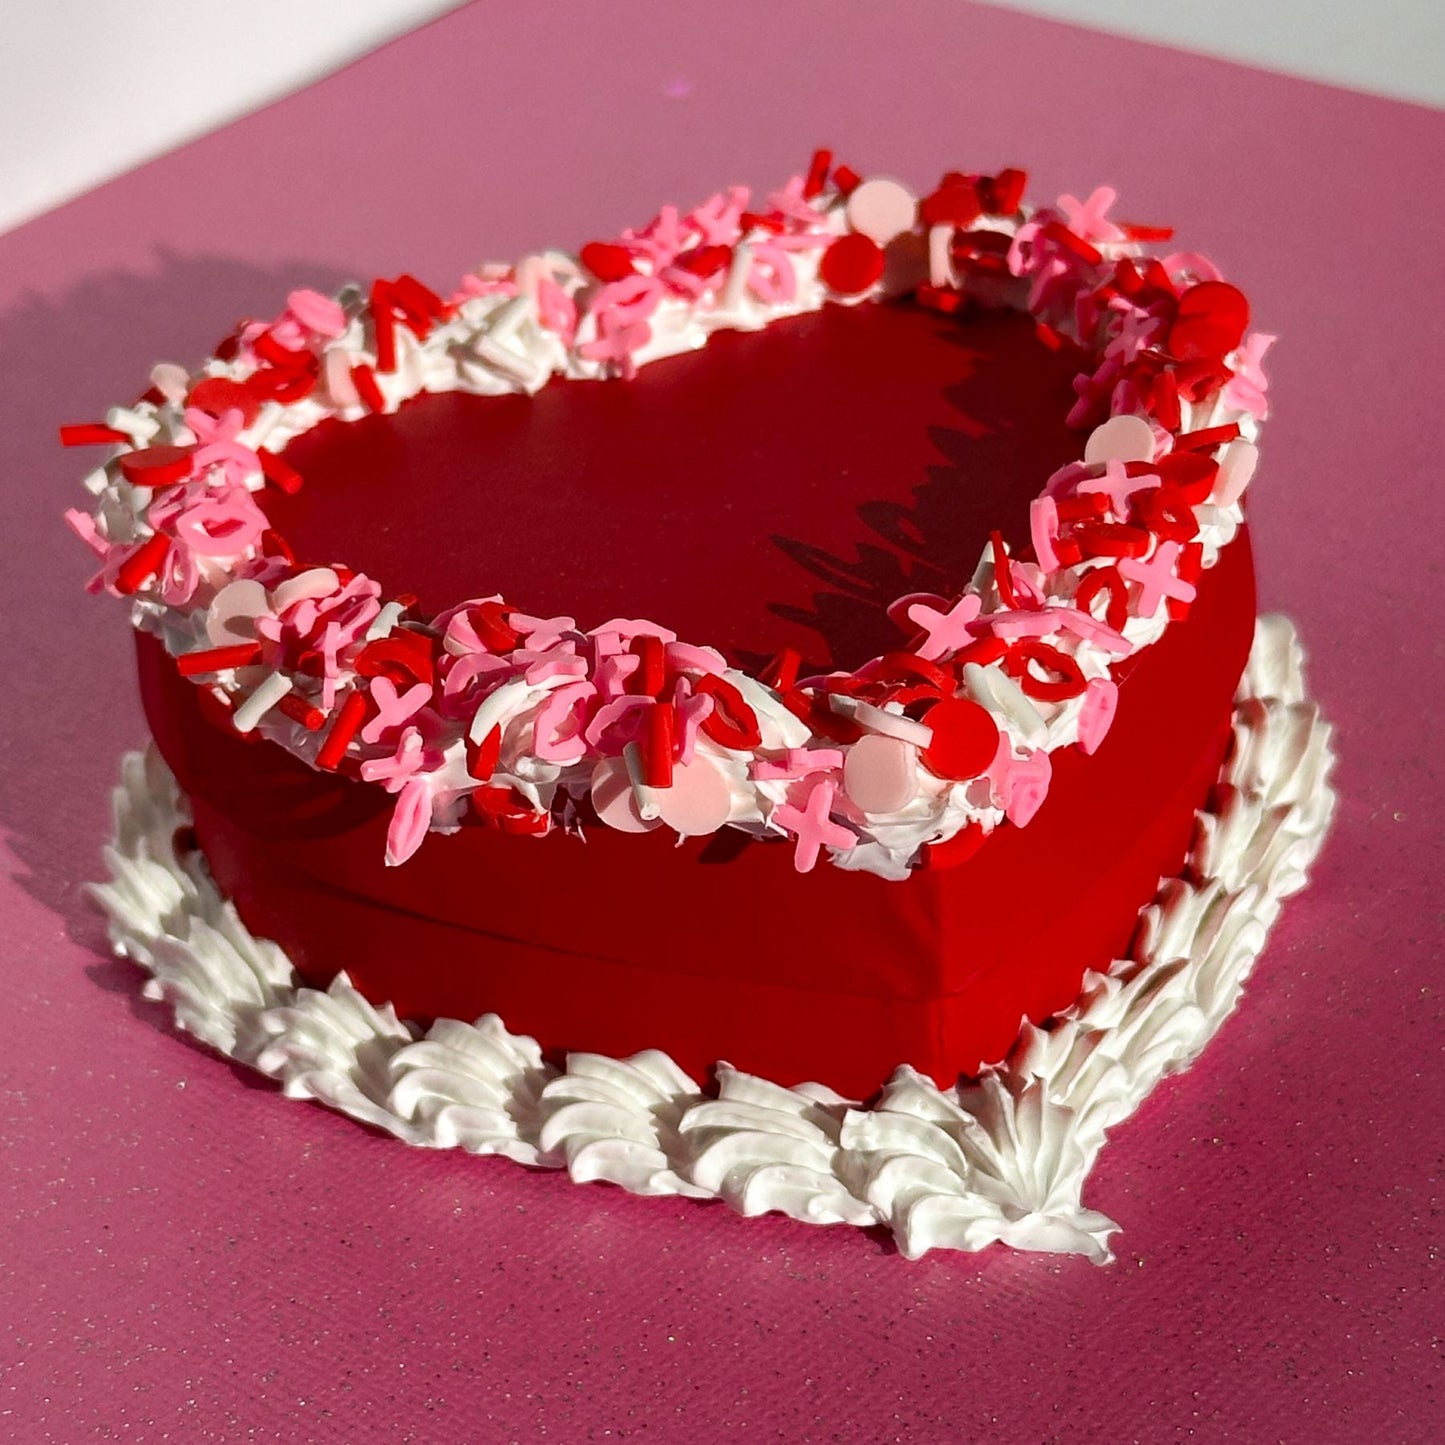 3D Painted Cake - Heart Box Red With Valentine's Day Sprinkles